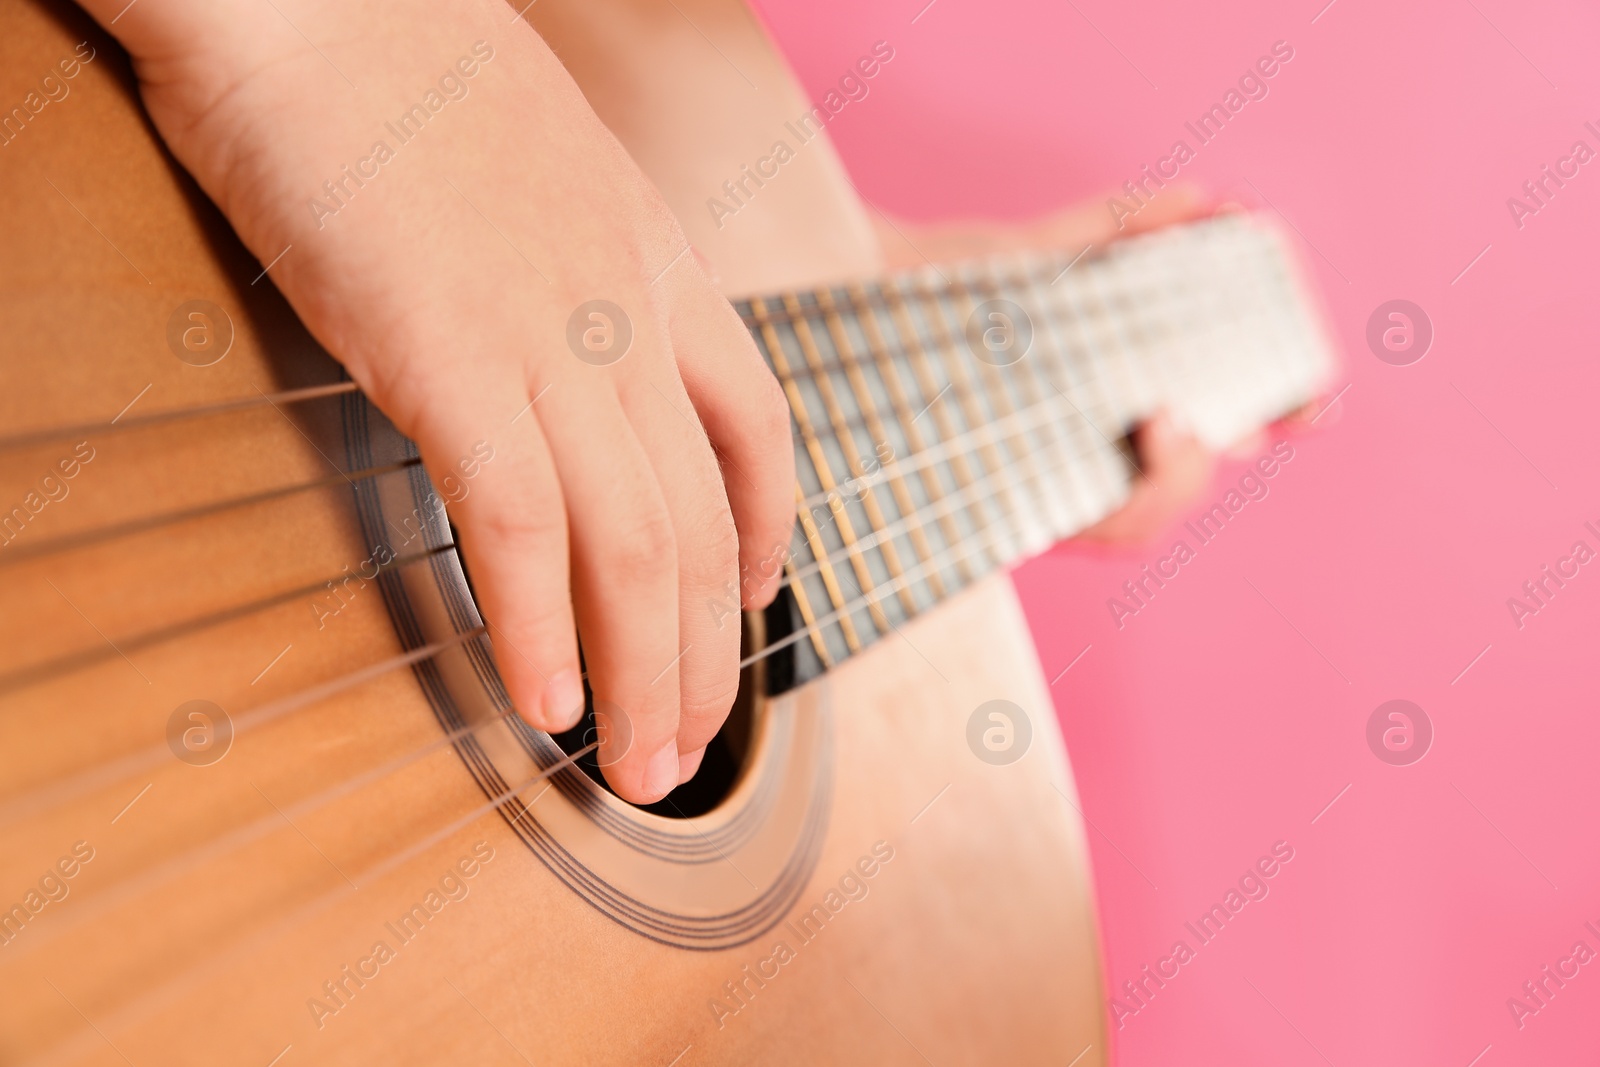 Photo of Little girl playing wooden guitar, closeup view